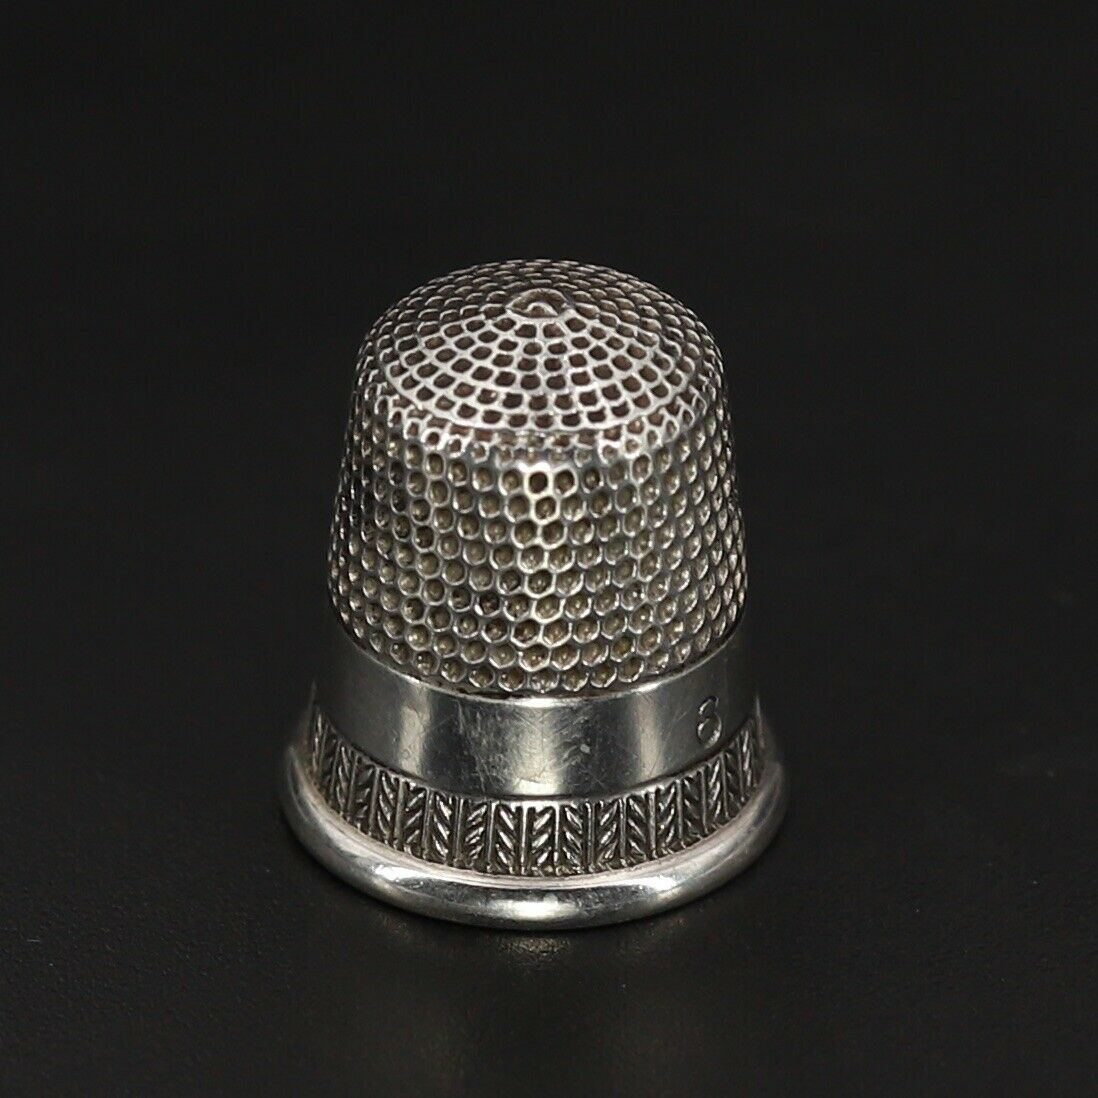 Vtg Sterling Silver - Antique Chevron Striped Sew Sewing Thimble Size 6 - 2g